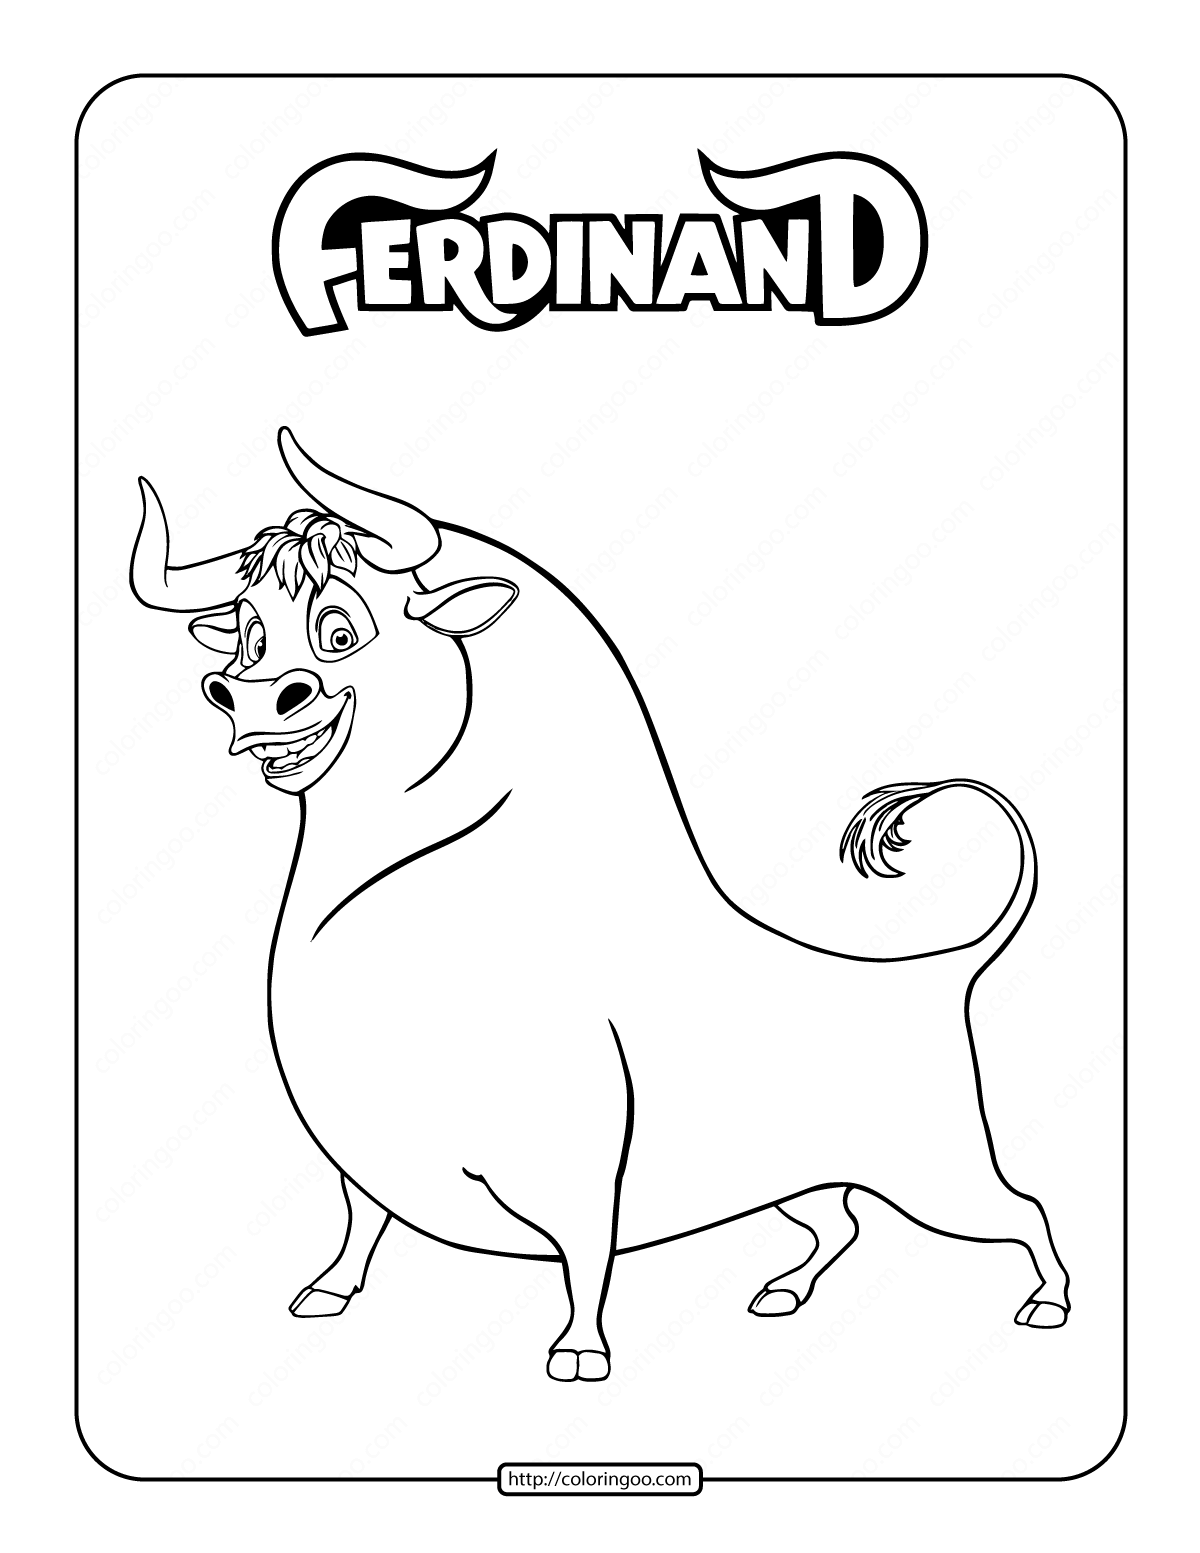 the bull ferdinand coloring page